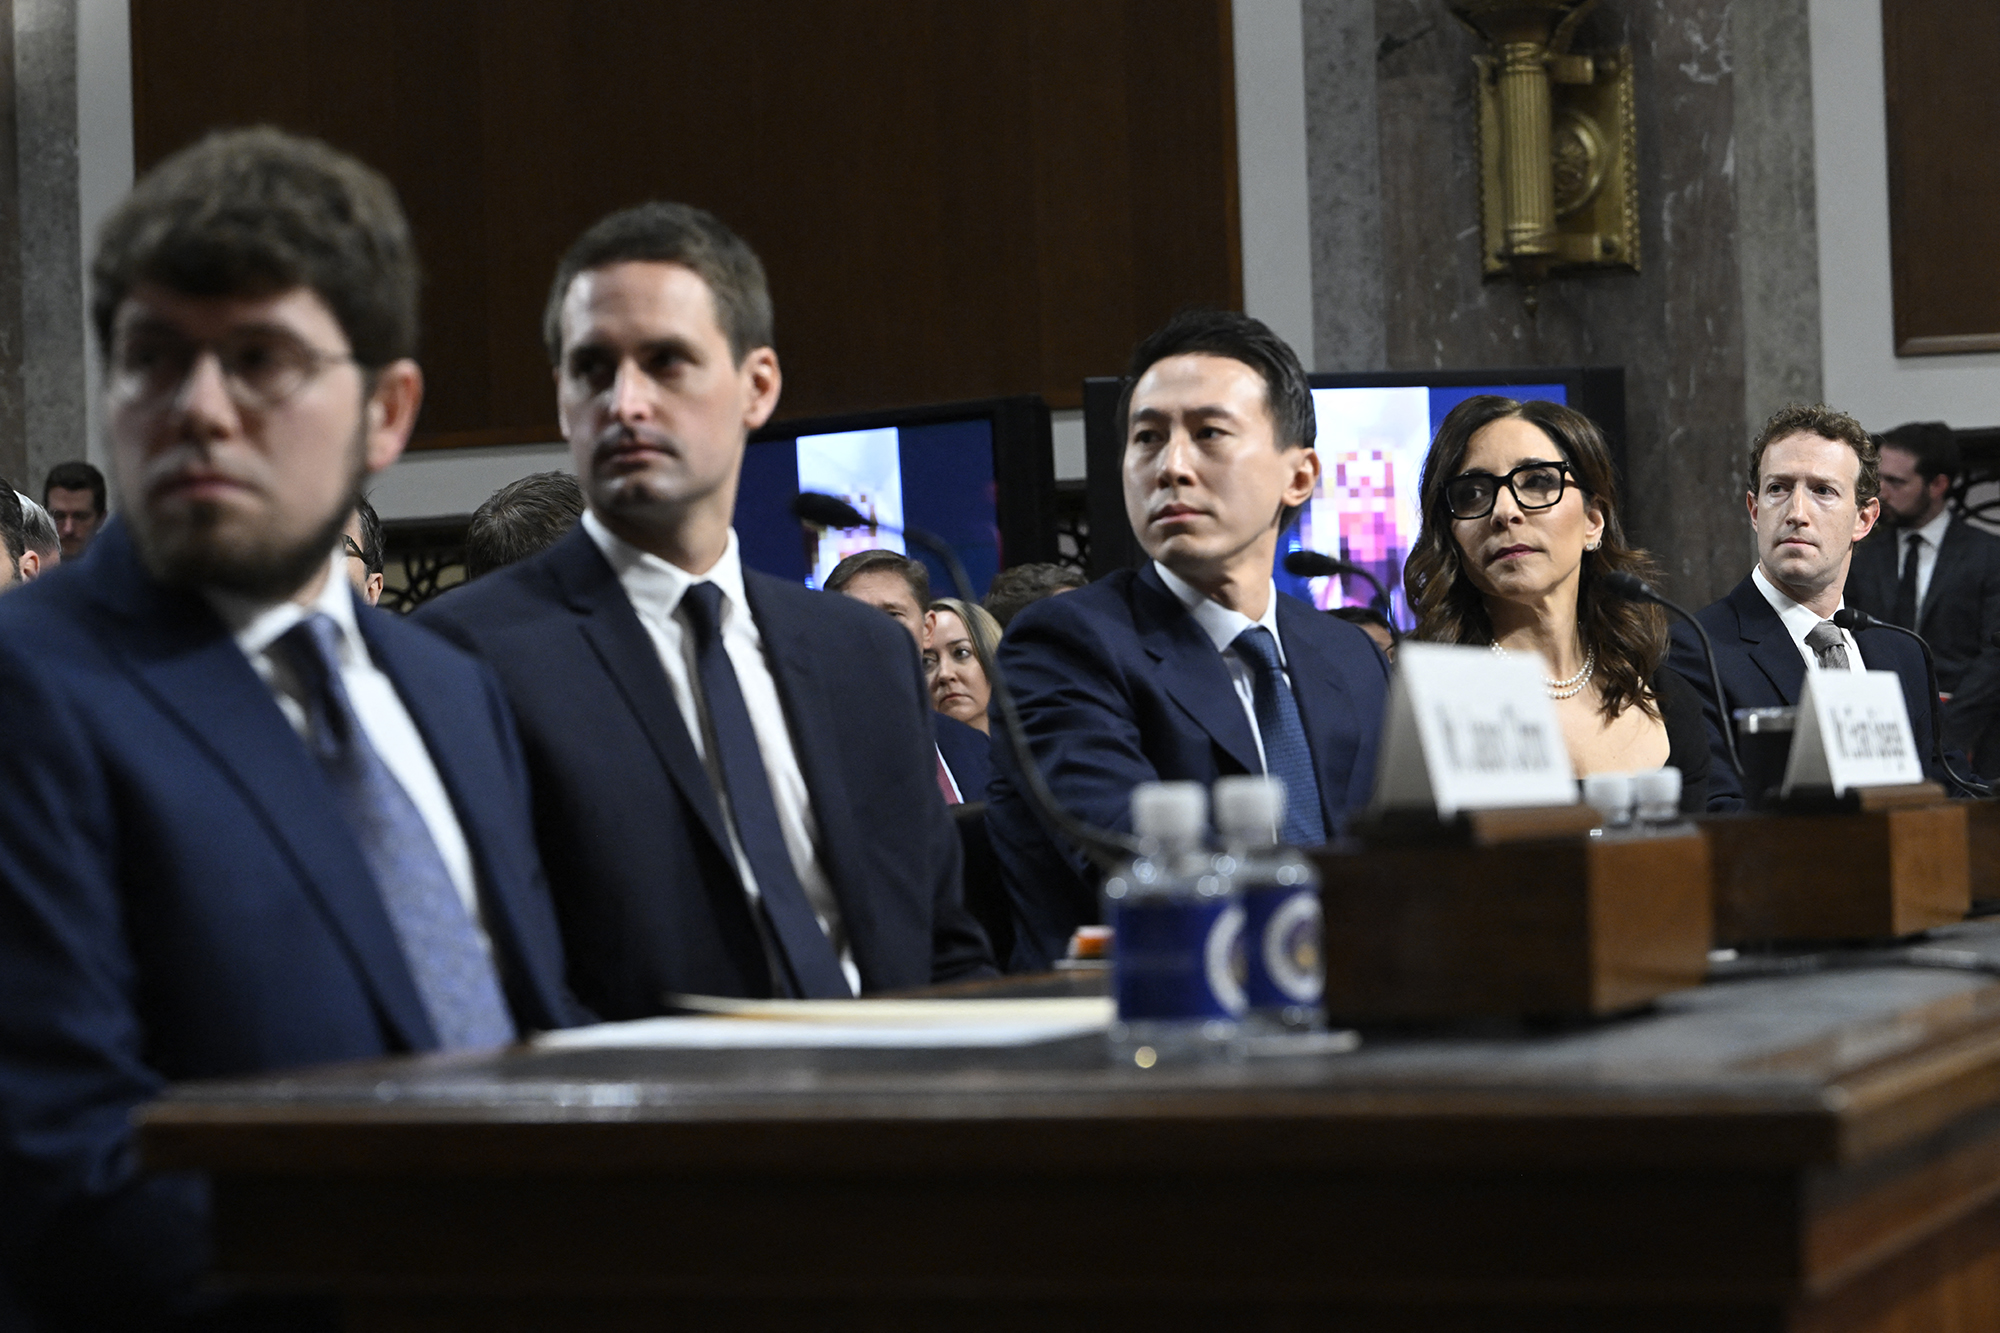 (L-R) Jason Citron, CEO of Discord; Evan Spiegel, CEO of Snap; Shou Zi Chew, CEO of TikTok; Linda Yaccarino, CEO of X; and Mark Zuckerberg, CEO of Meta, watch a video of victims before testifying at the US Senate Judiciary Committee hearing, "Big Tech and the Online Child Sexual Exploitation Crisis," in Washington, DC, today.